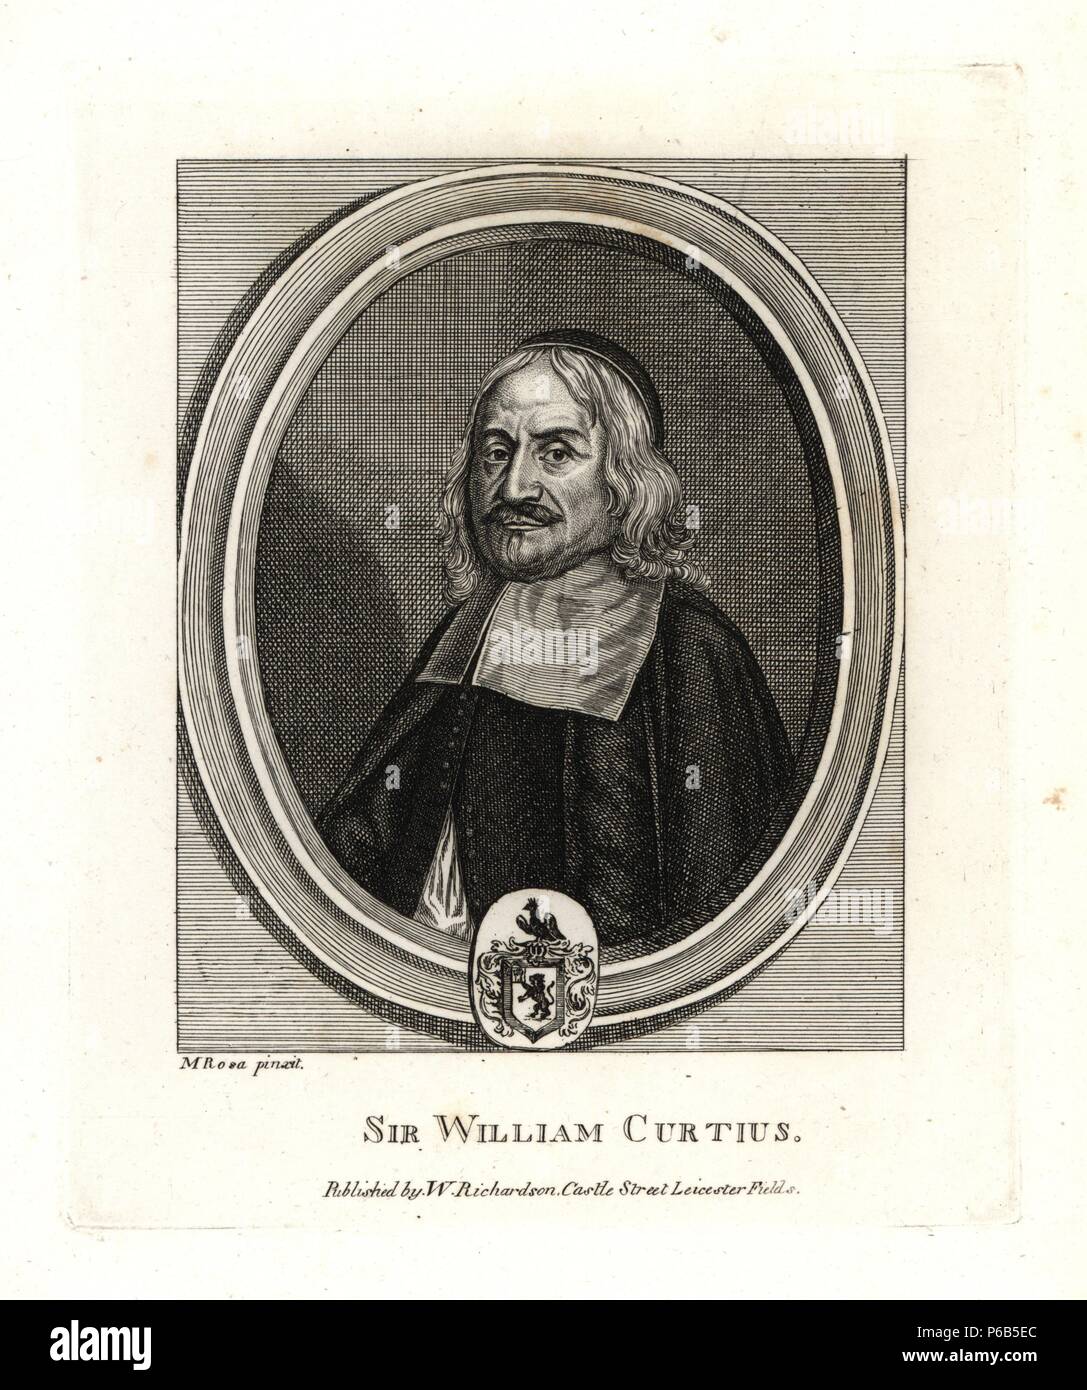 Sir William Curtius, Latine Curtius, official resident of the English Crown in the Holy Roman Empire and Fellow of the Royal Society. From a rare print after a picture by H.M. Rosa. Copperplate engraving from Richardson's 'Portraits illustrating Granger's Biographical History of England,' London, 1792–1812. Published by William Richardson, printseller, London. James Granger (1723–1776) was an English clergyman, biographer, and print collector. Stock Photo